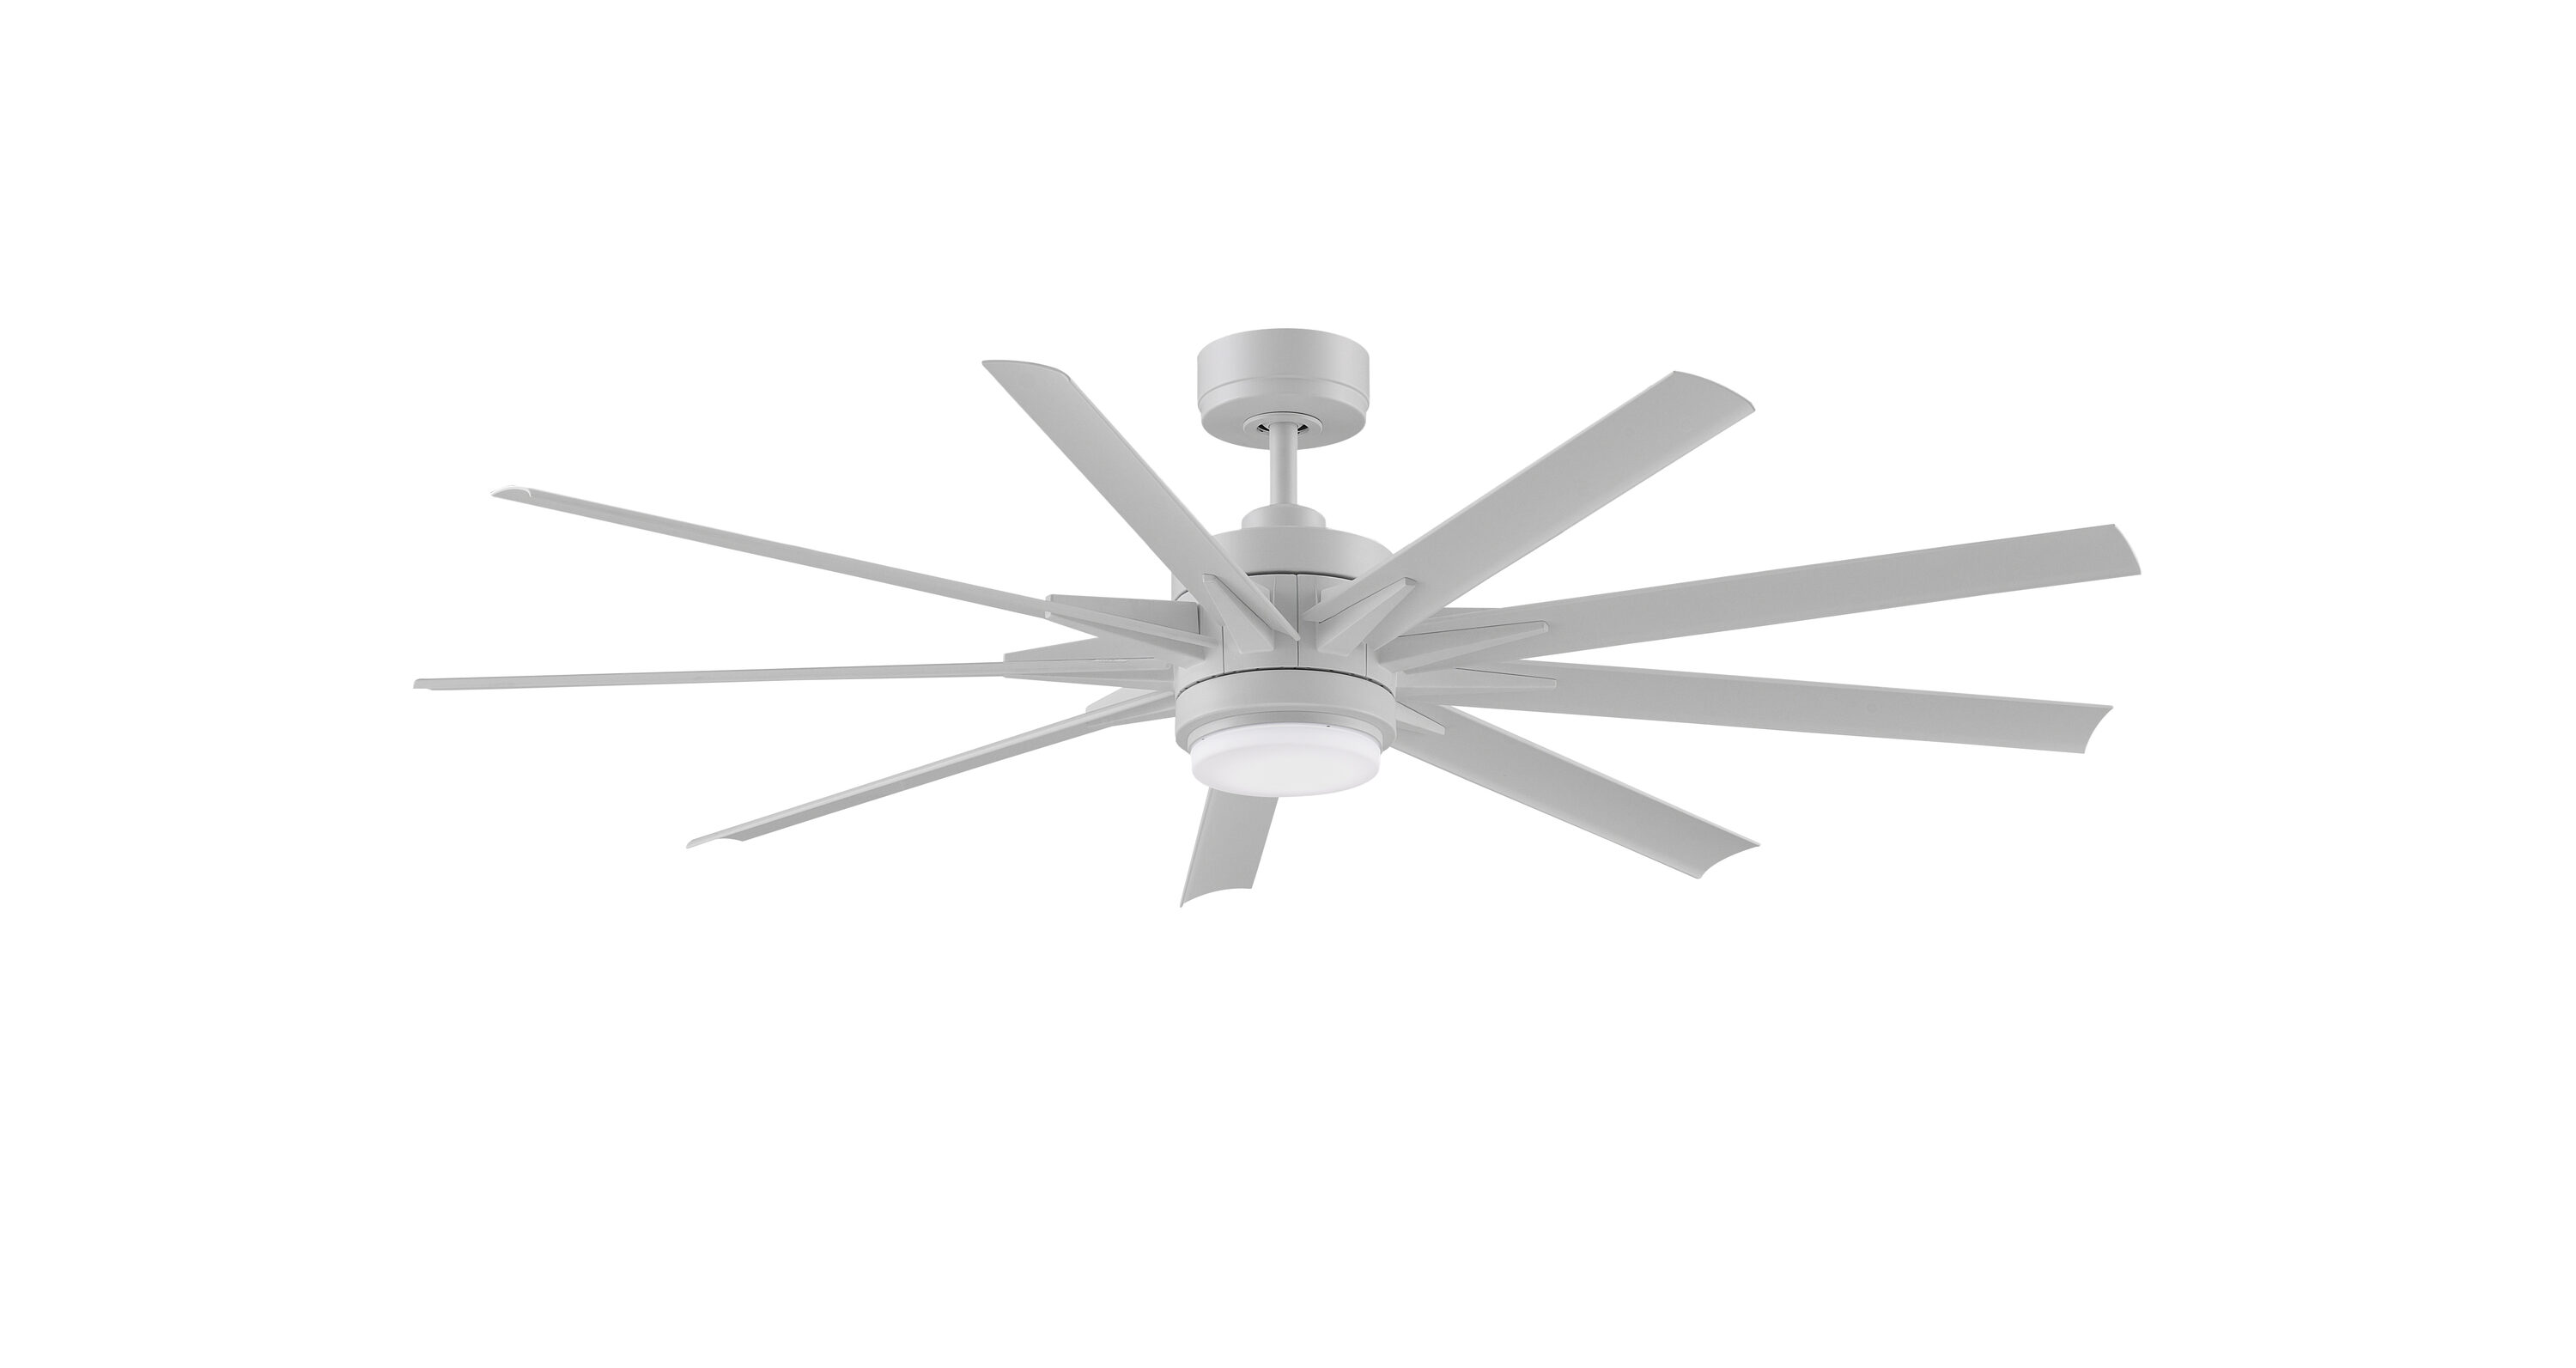 Odyn Custom 64-in Matte White Color-changing LED Indoor/Outdoor Smart Ceiling Fan with Light Remote (9-Blade) Walnut | - Fanimation FPD8152MWW-64MWW